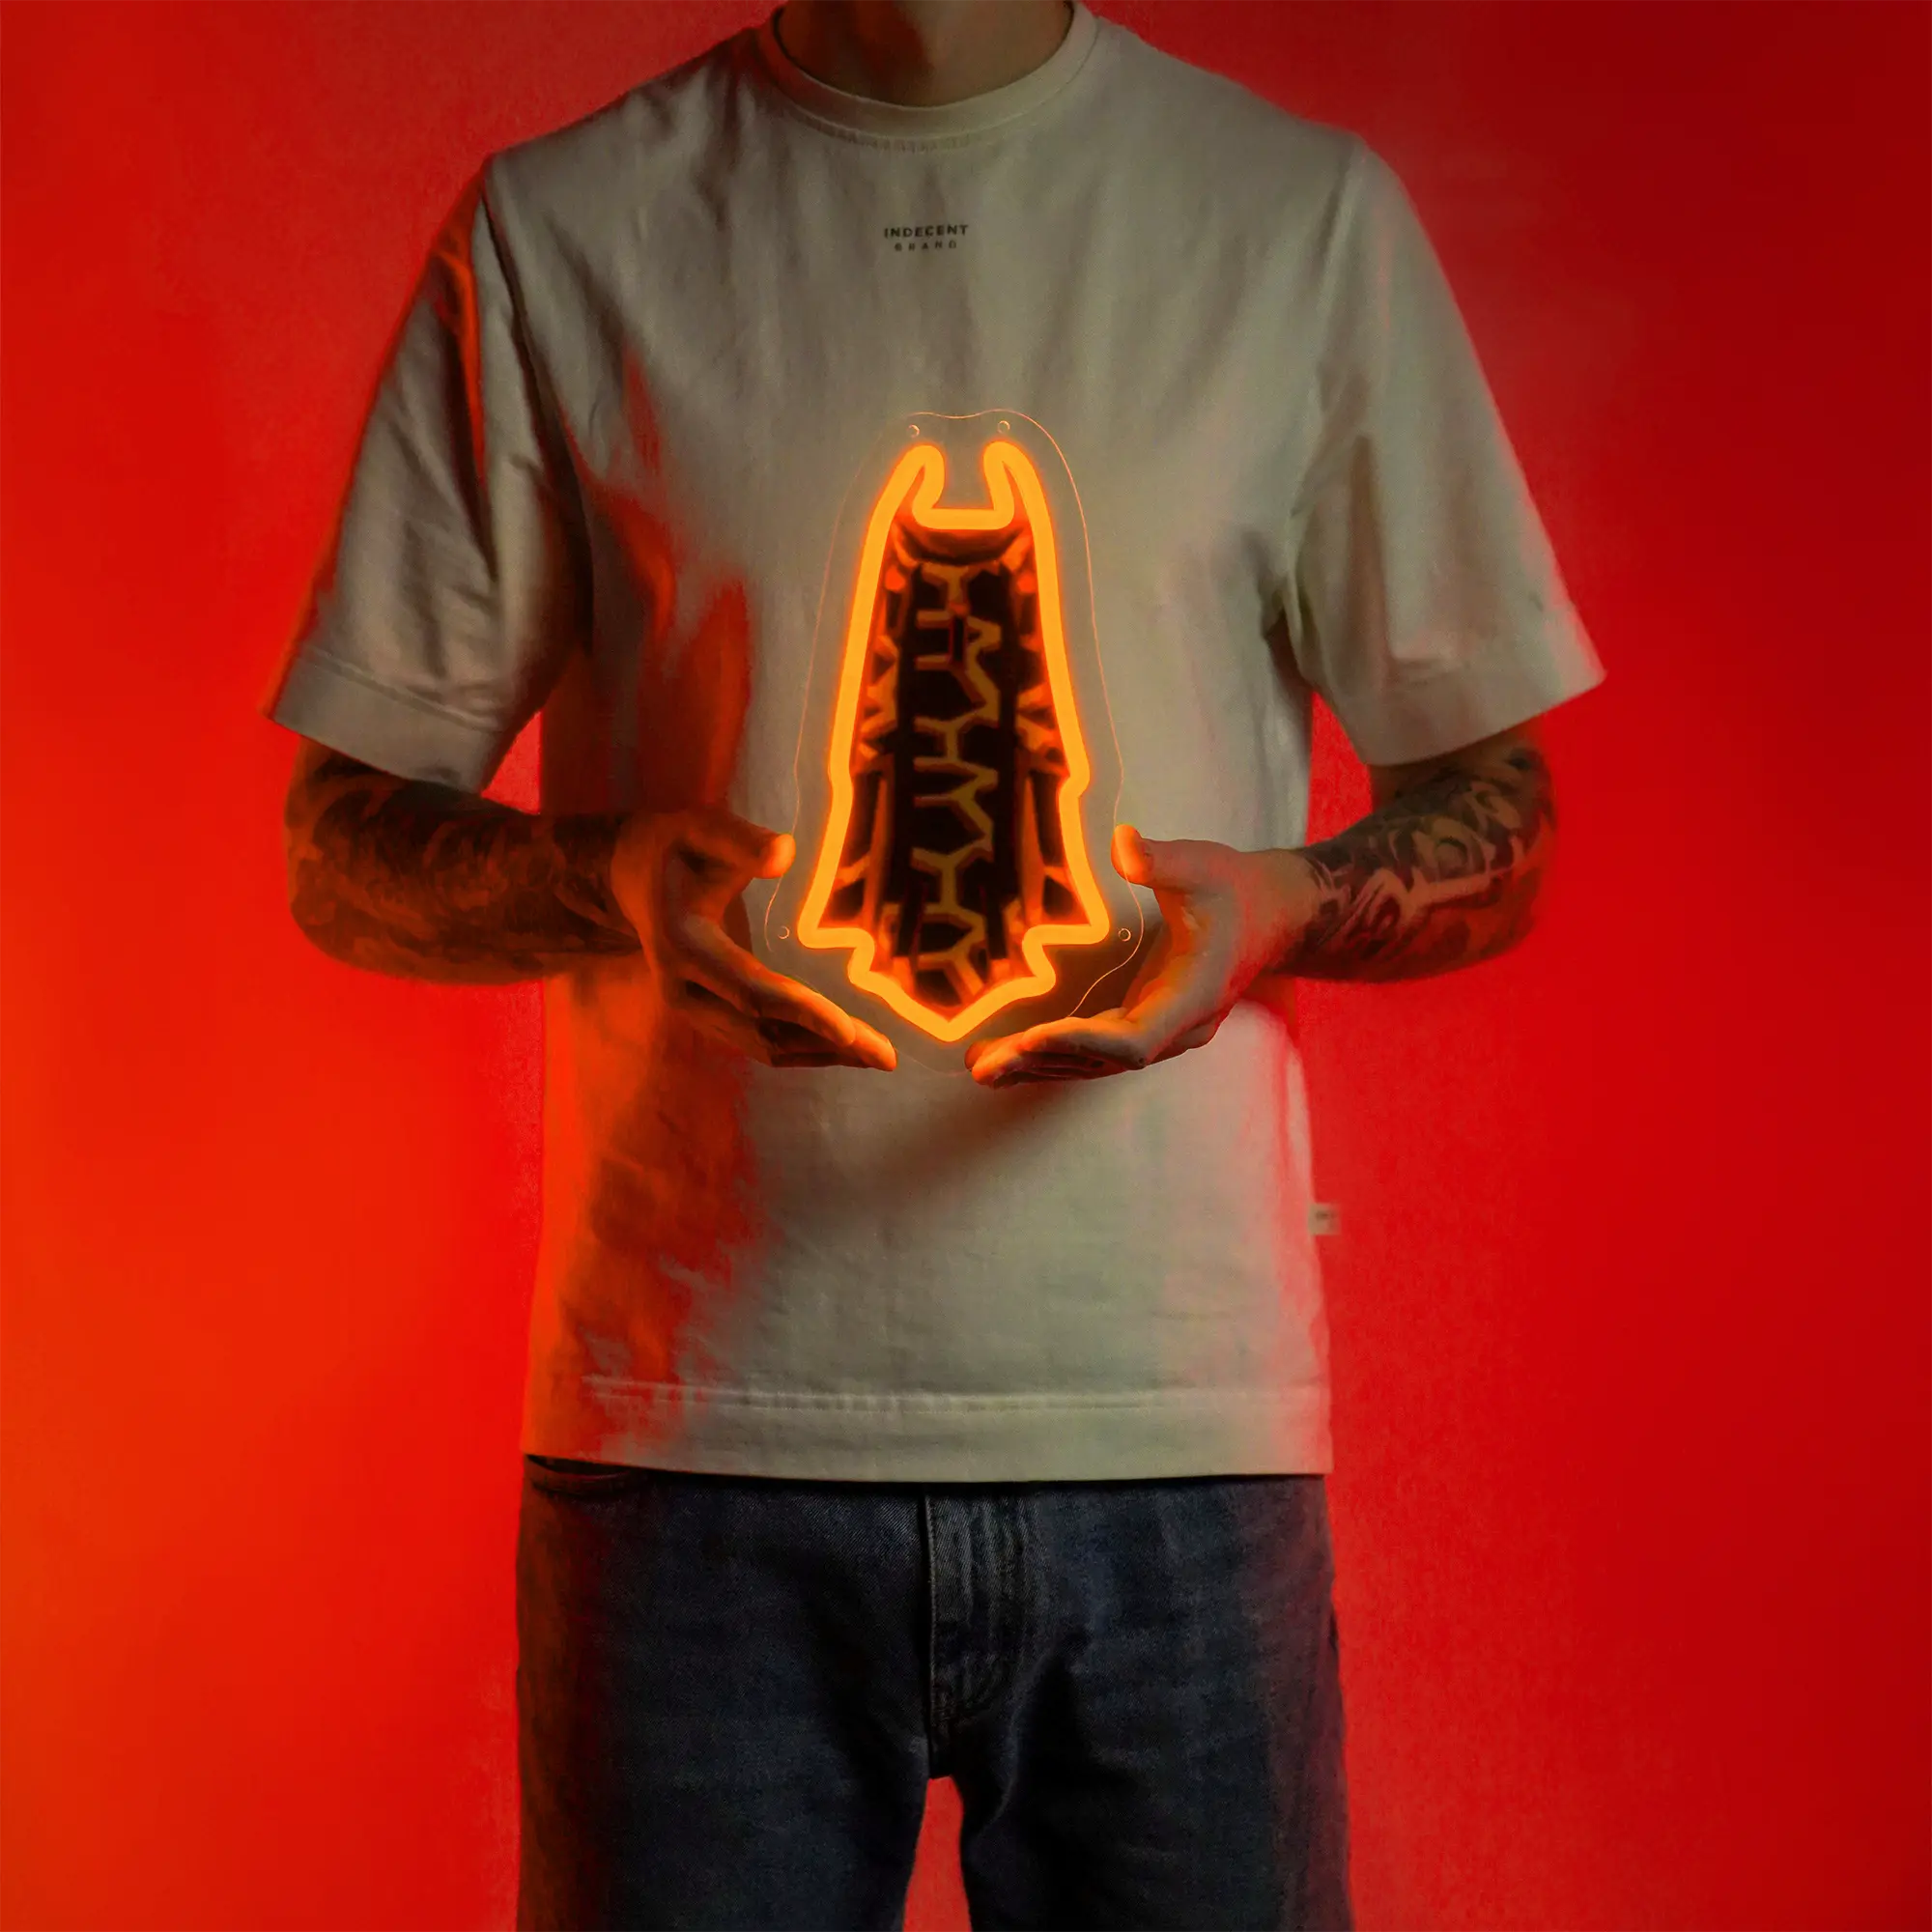 A person proudly displays the Runescape Infernal Max Cape LED neon sign, featuring the prestigious Infernal Max Cape from the game. This LED neon sign represents the pinnacle of achievement and skill in Old School RuneScape. A prestigious and nostalgic gift for RS enthusiasts.